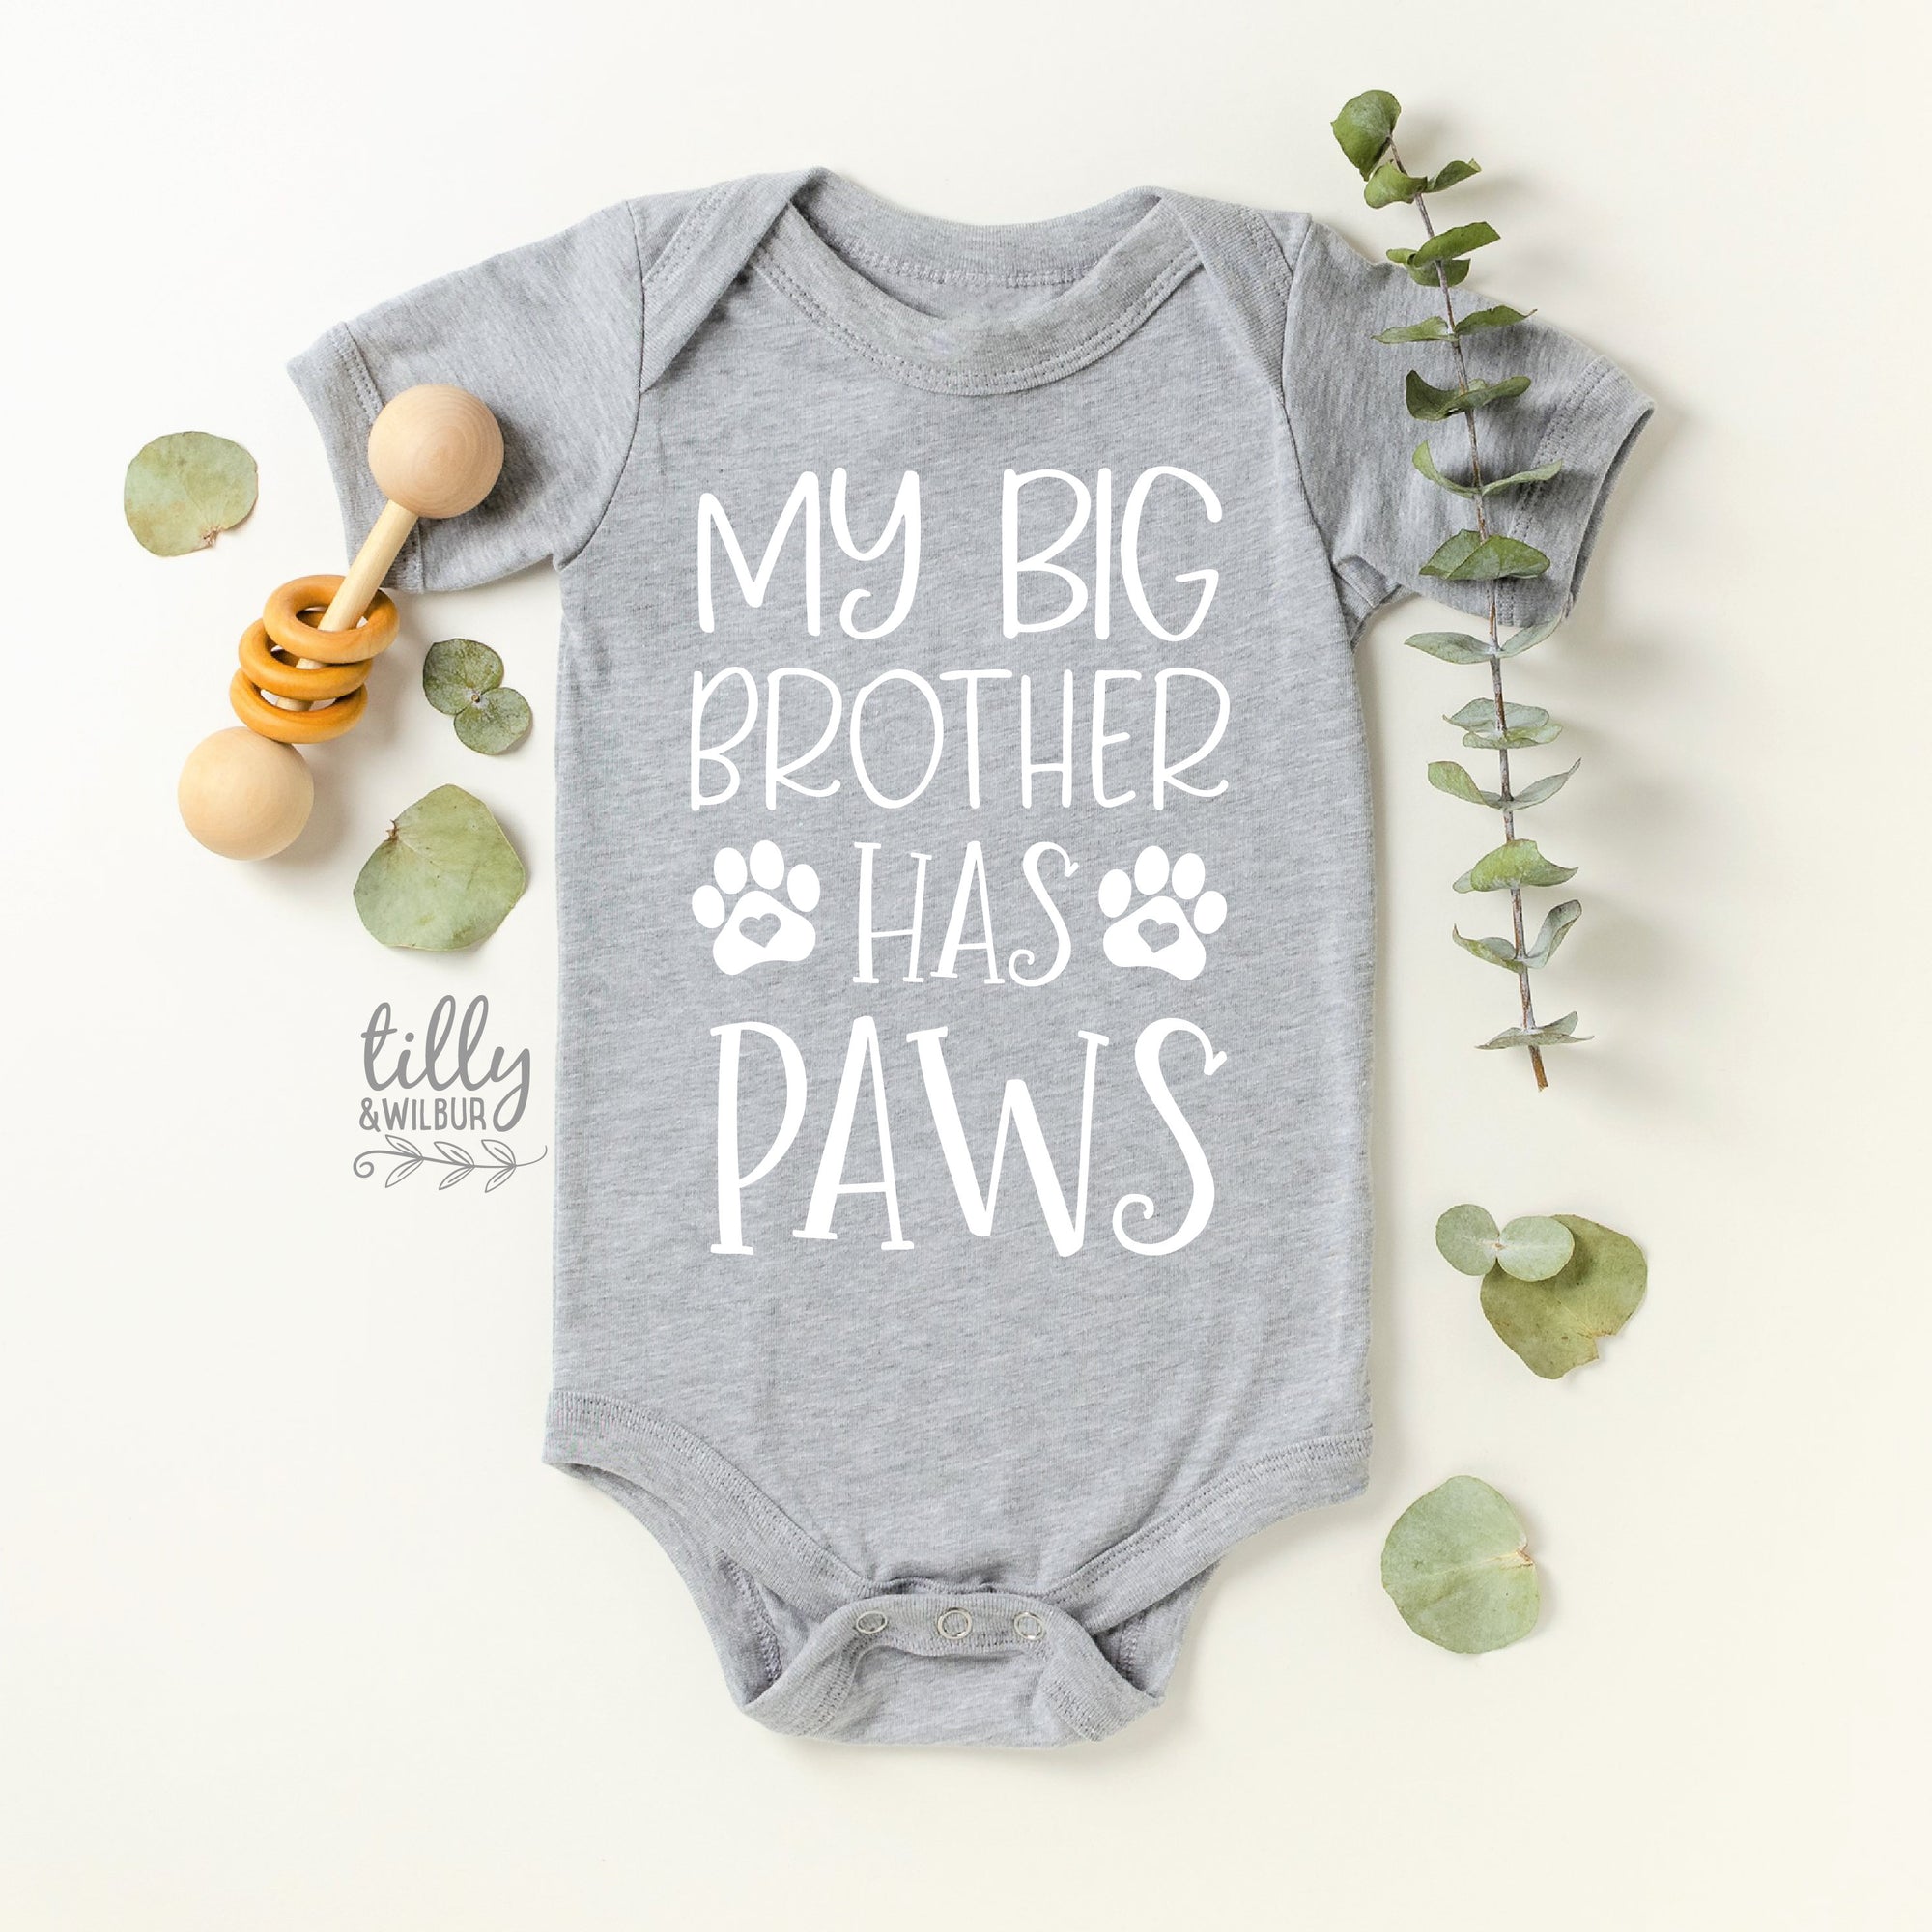 My Big Brother Has Paws Baby Bodysuit, My Siblings Have Paws,  Dog Owner Baby Gift, Pregnancy Announcement Bodysuit, Dog Lover, New Baby